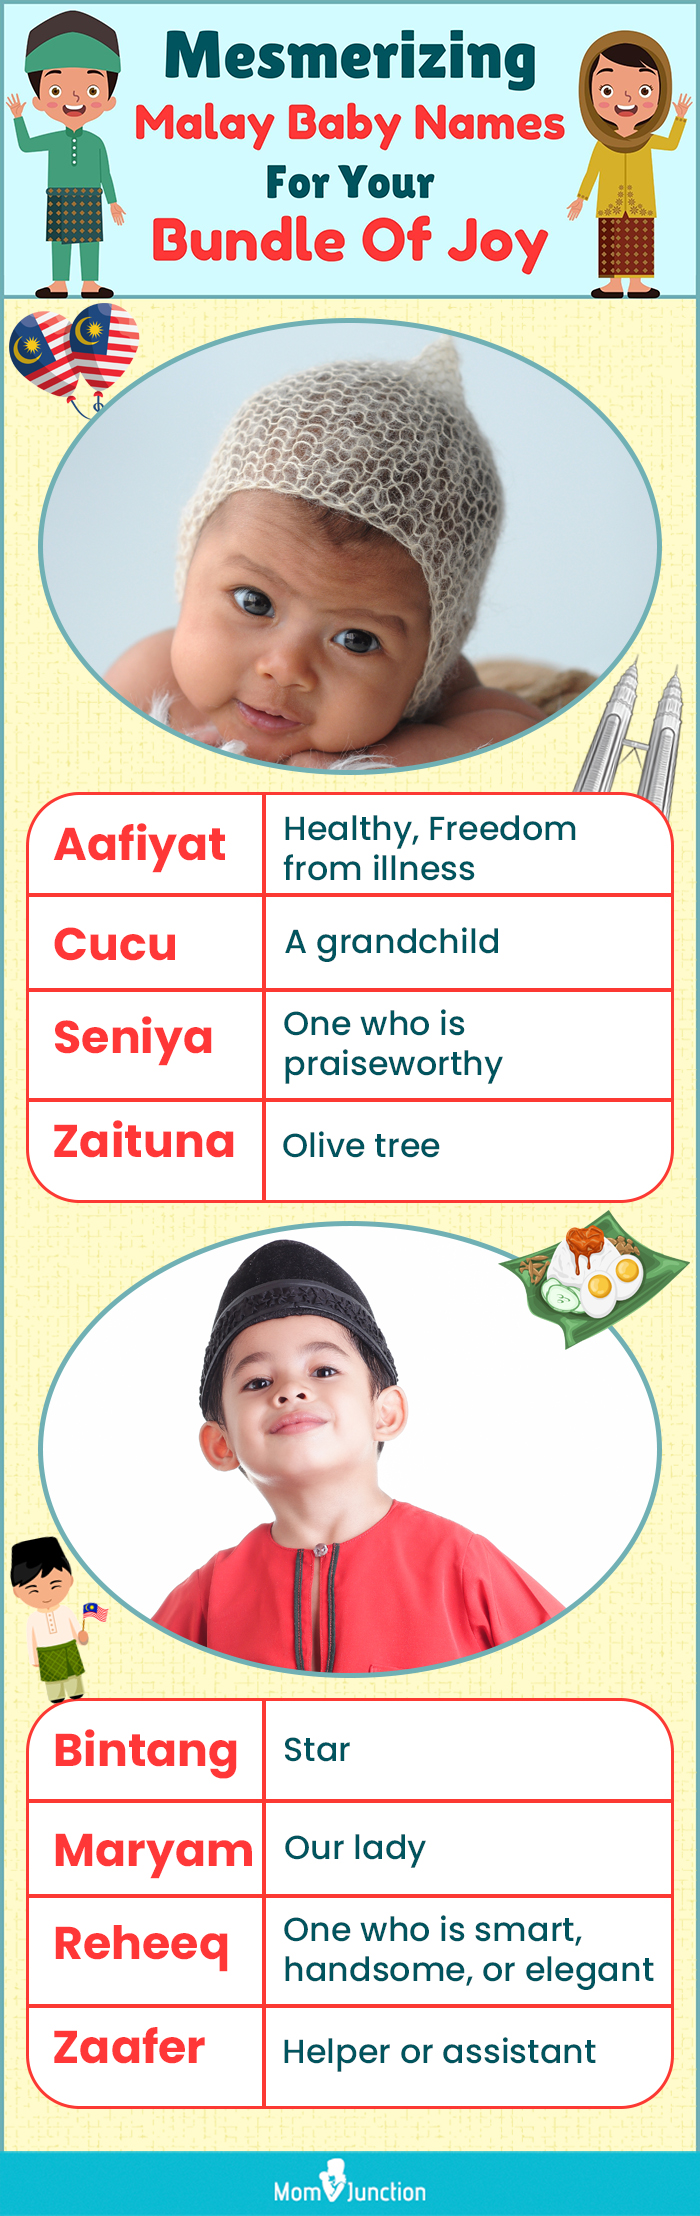 mesmerizing malay baby names for your bundle of joy (infographic)